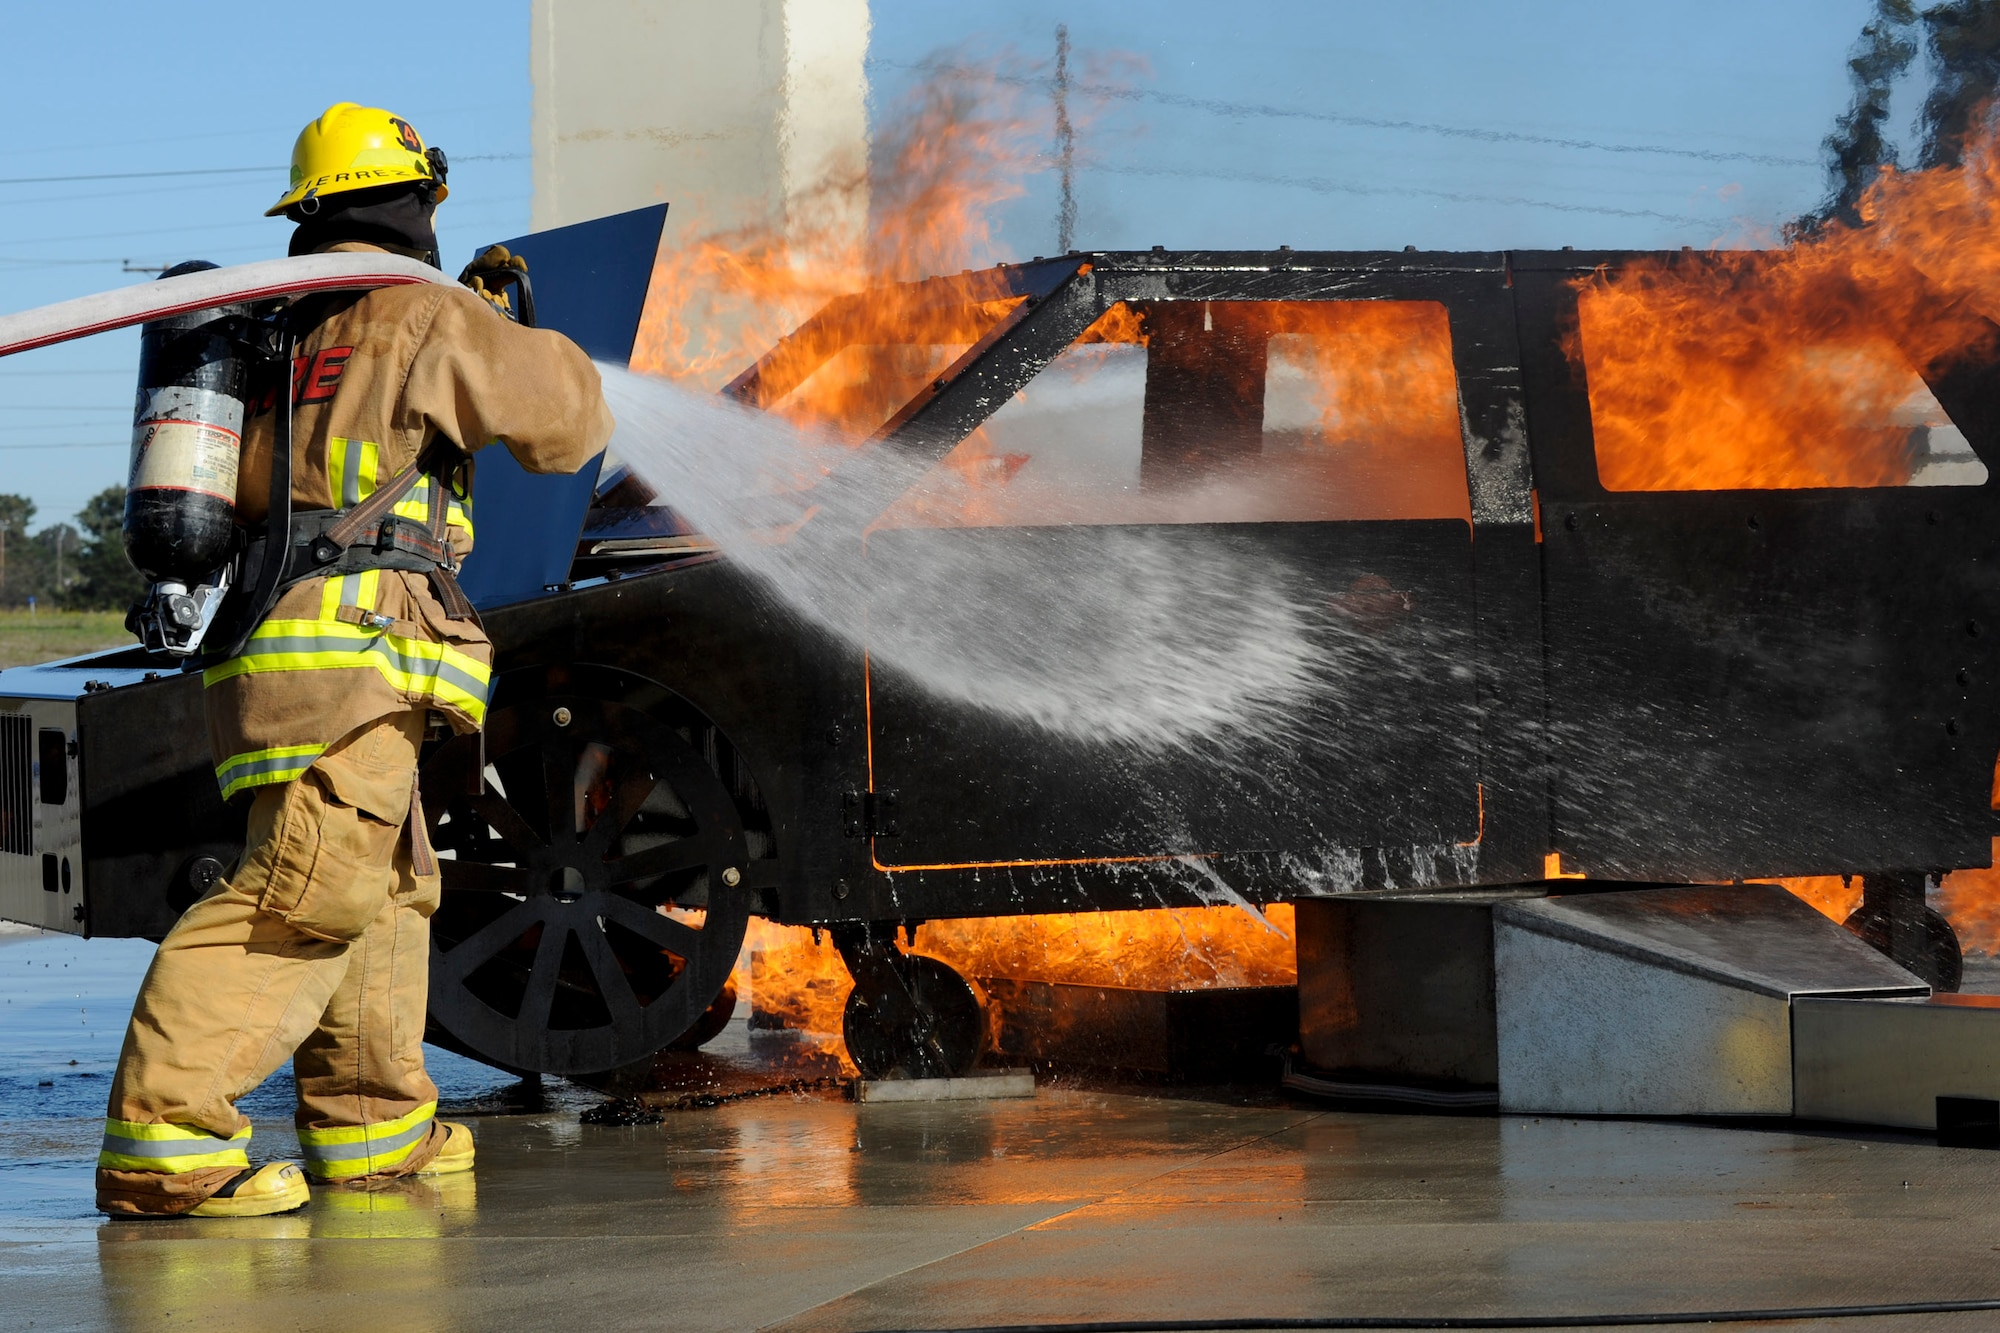 VANDENBERG AIR FORCE BASE, Calif. – A student firefighter from Allen Hancock College Fire Academy puts out a car fire during training at the Turner Bell Fire Training Campus here Wednesday, Nov. 30, 2011. . Allen Hancock College students trained at Vandenberg to help build the required skills while their Public Safety Complex, which will incorporate skill training facilities, is under construction. (U.S. Air Force photo/Staff Sgt. Levi Riendeau)